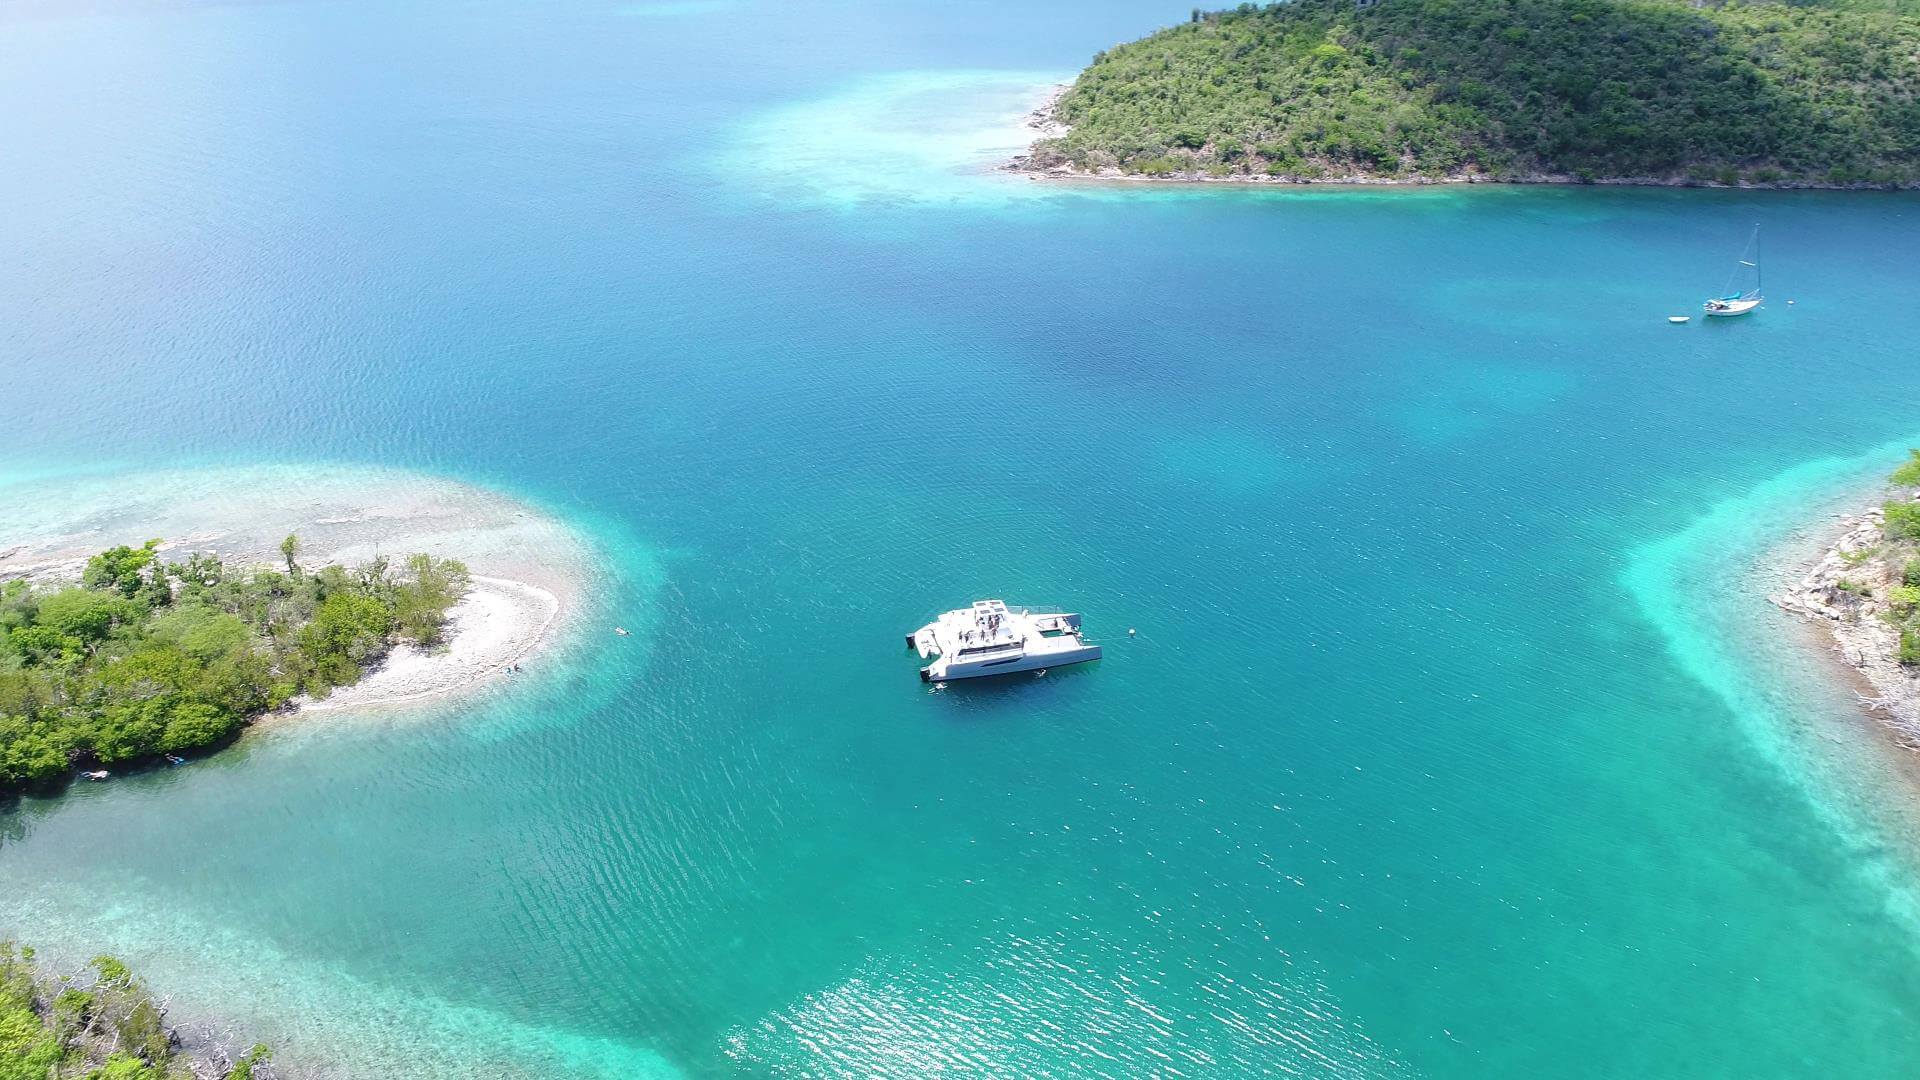 A private charter on Voodoo, tucked between the islands.